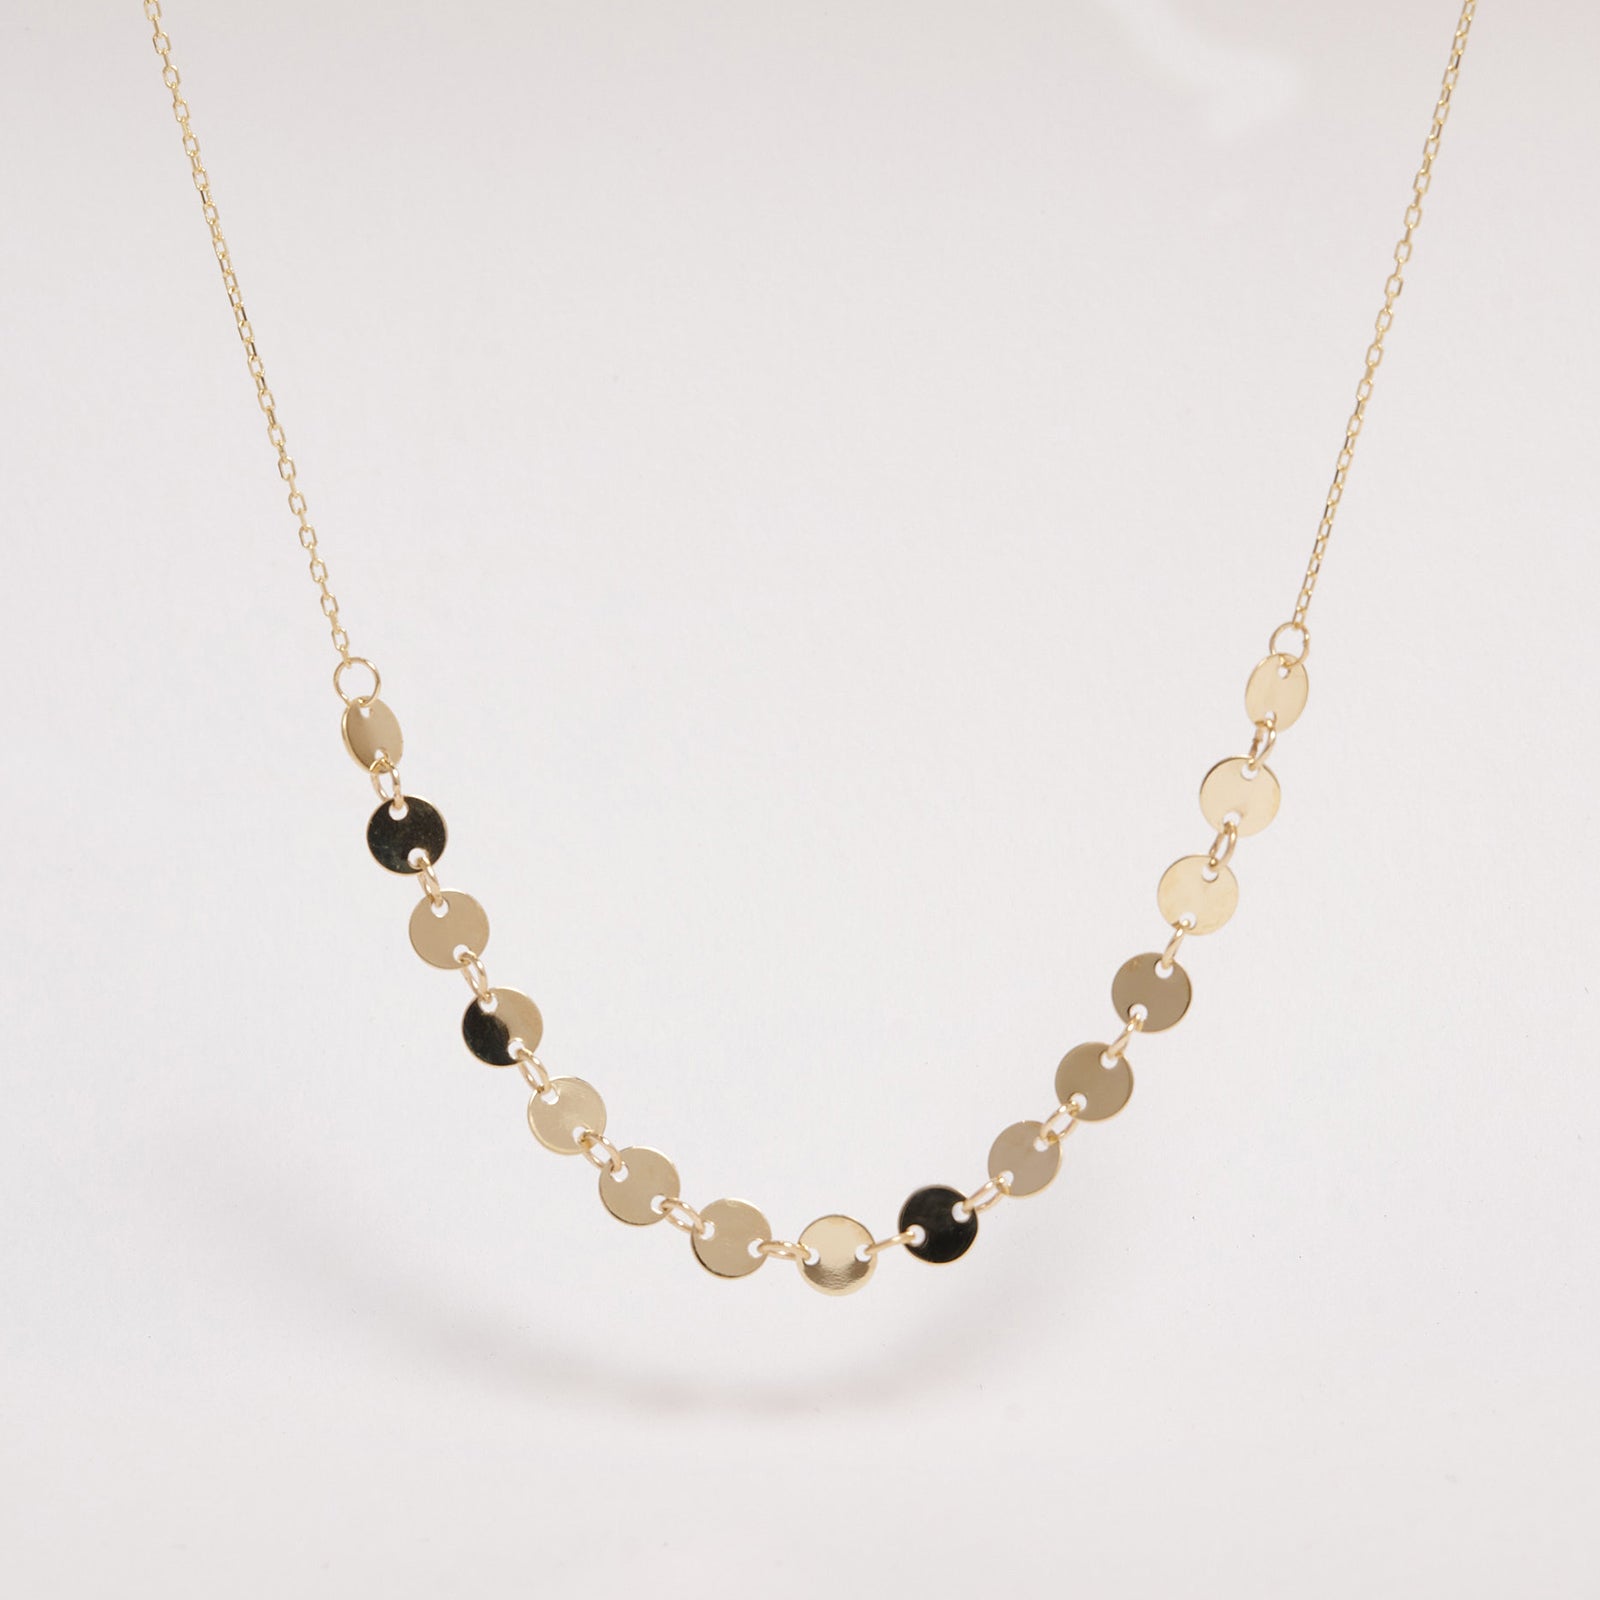 Idony 9ct Yellow Gold Necklace